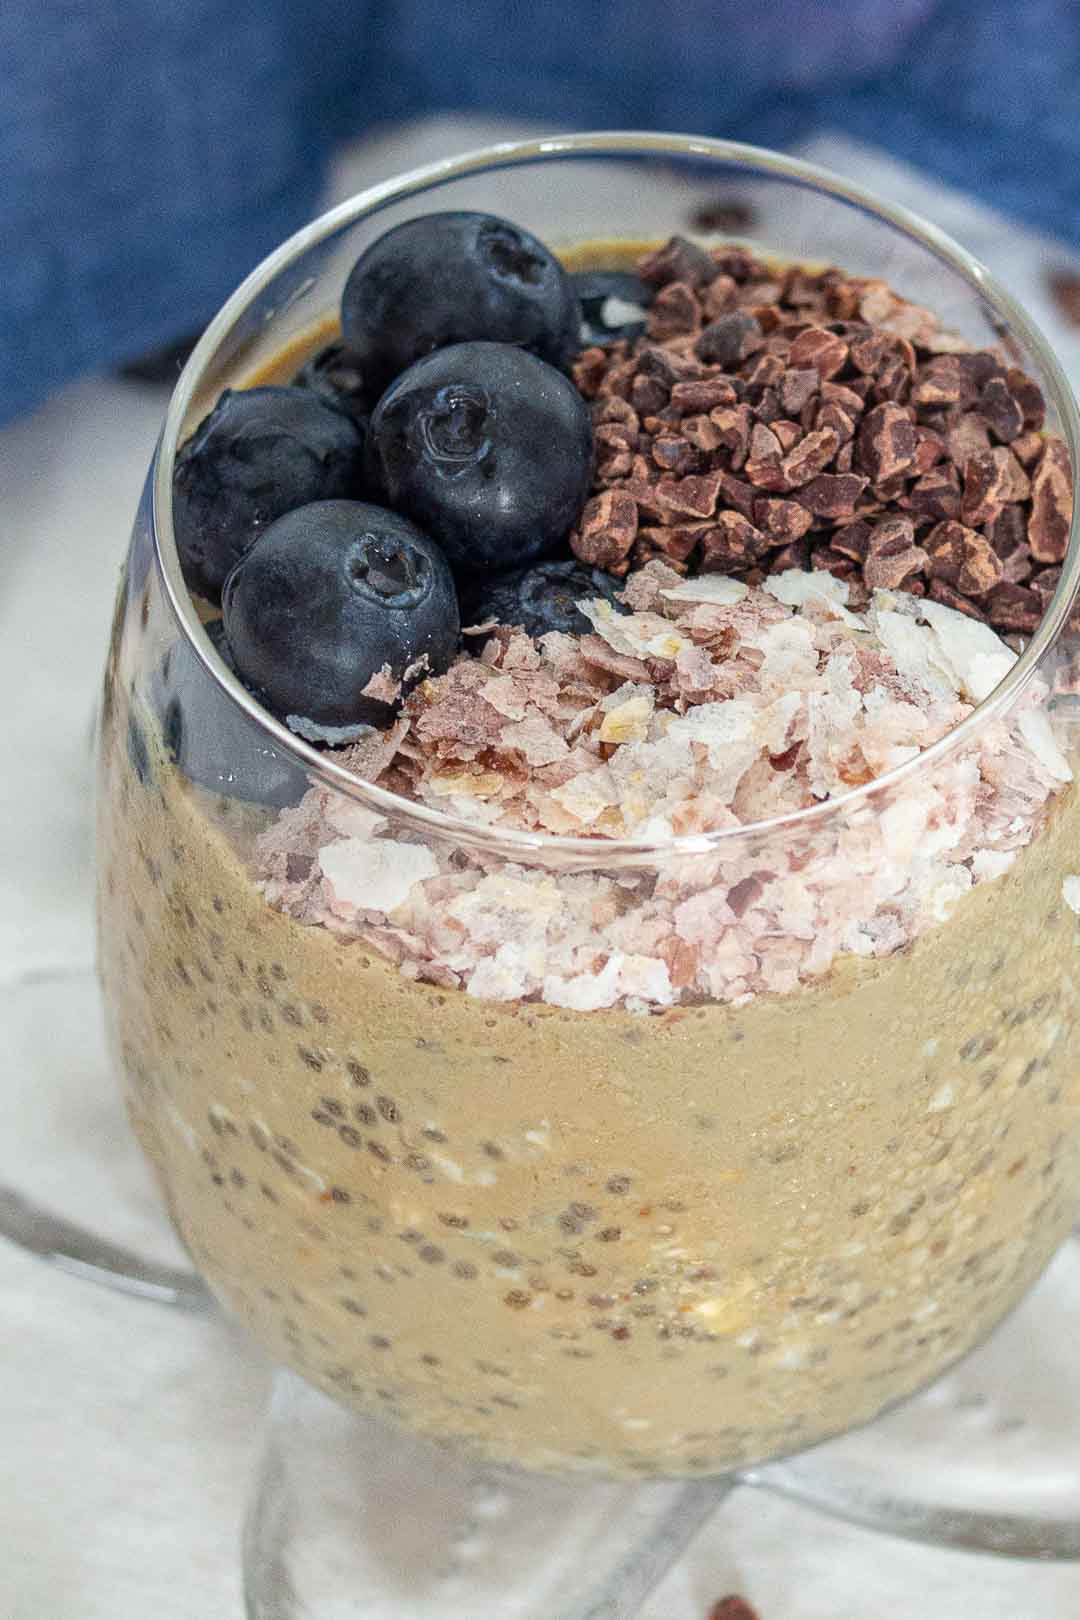 a close up of overnight oats with cacao nibs, blueberries and brown rice flakes in a glass